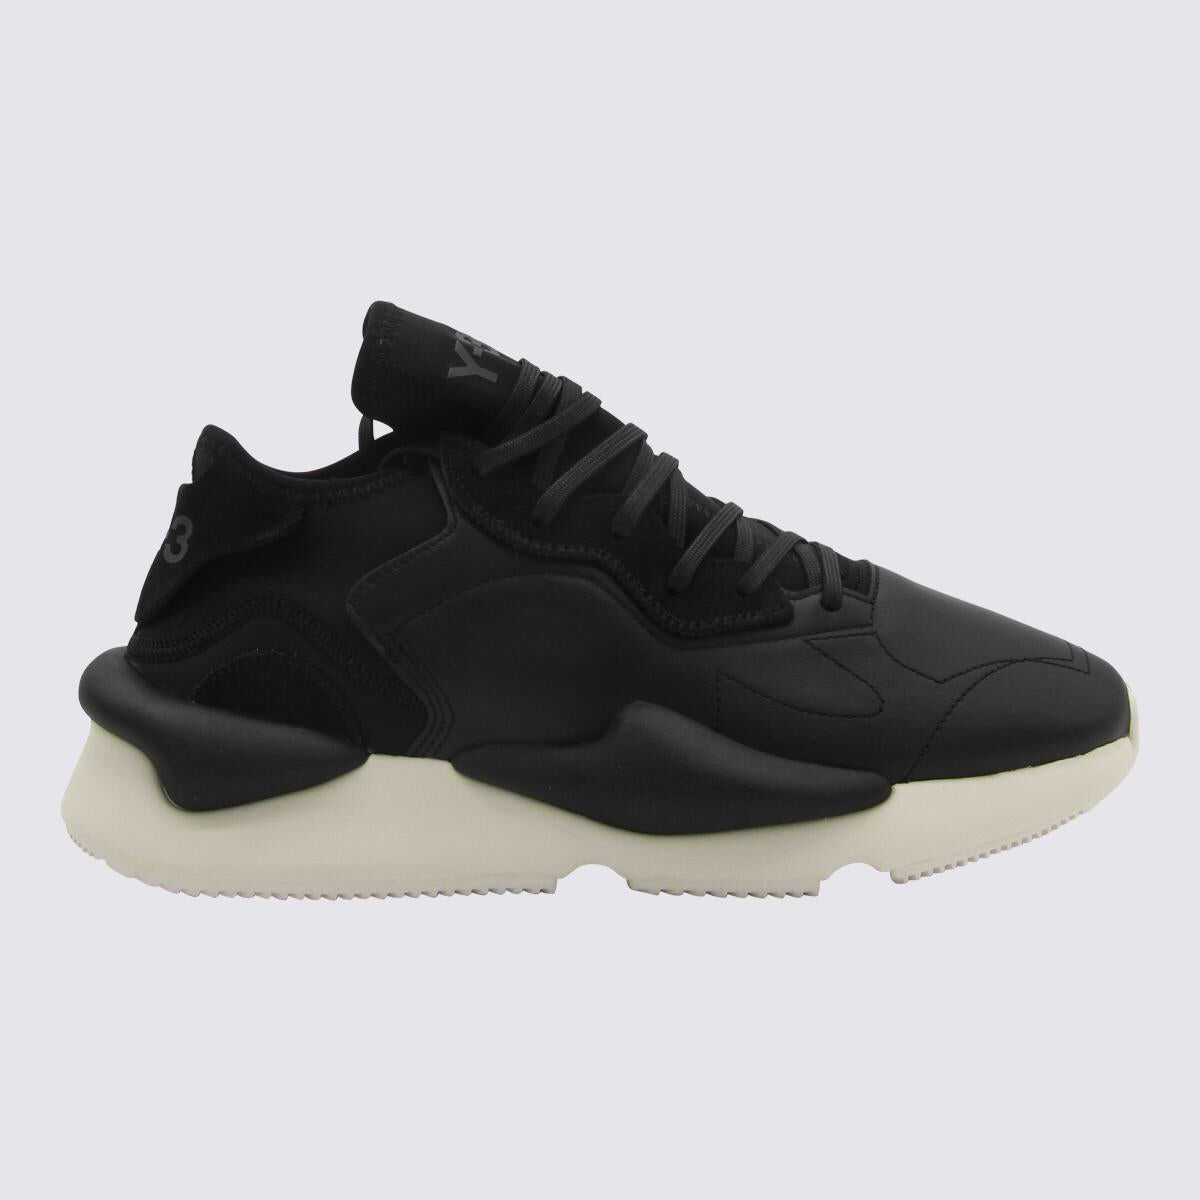 Y-3 Y-3 BLACK AND WHITE LEATHER KAIWA SNEAKERS black/black/off white